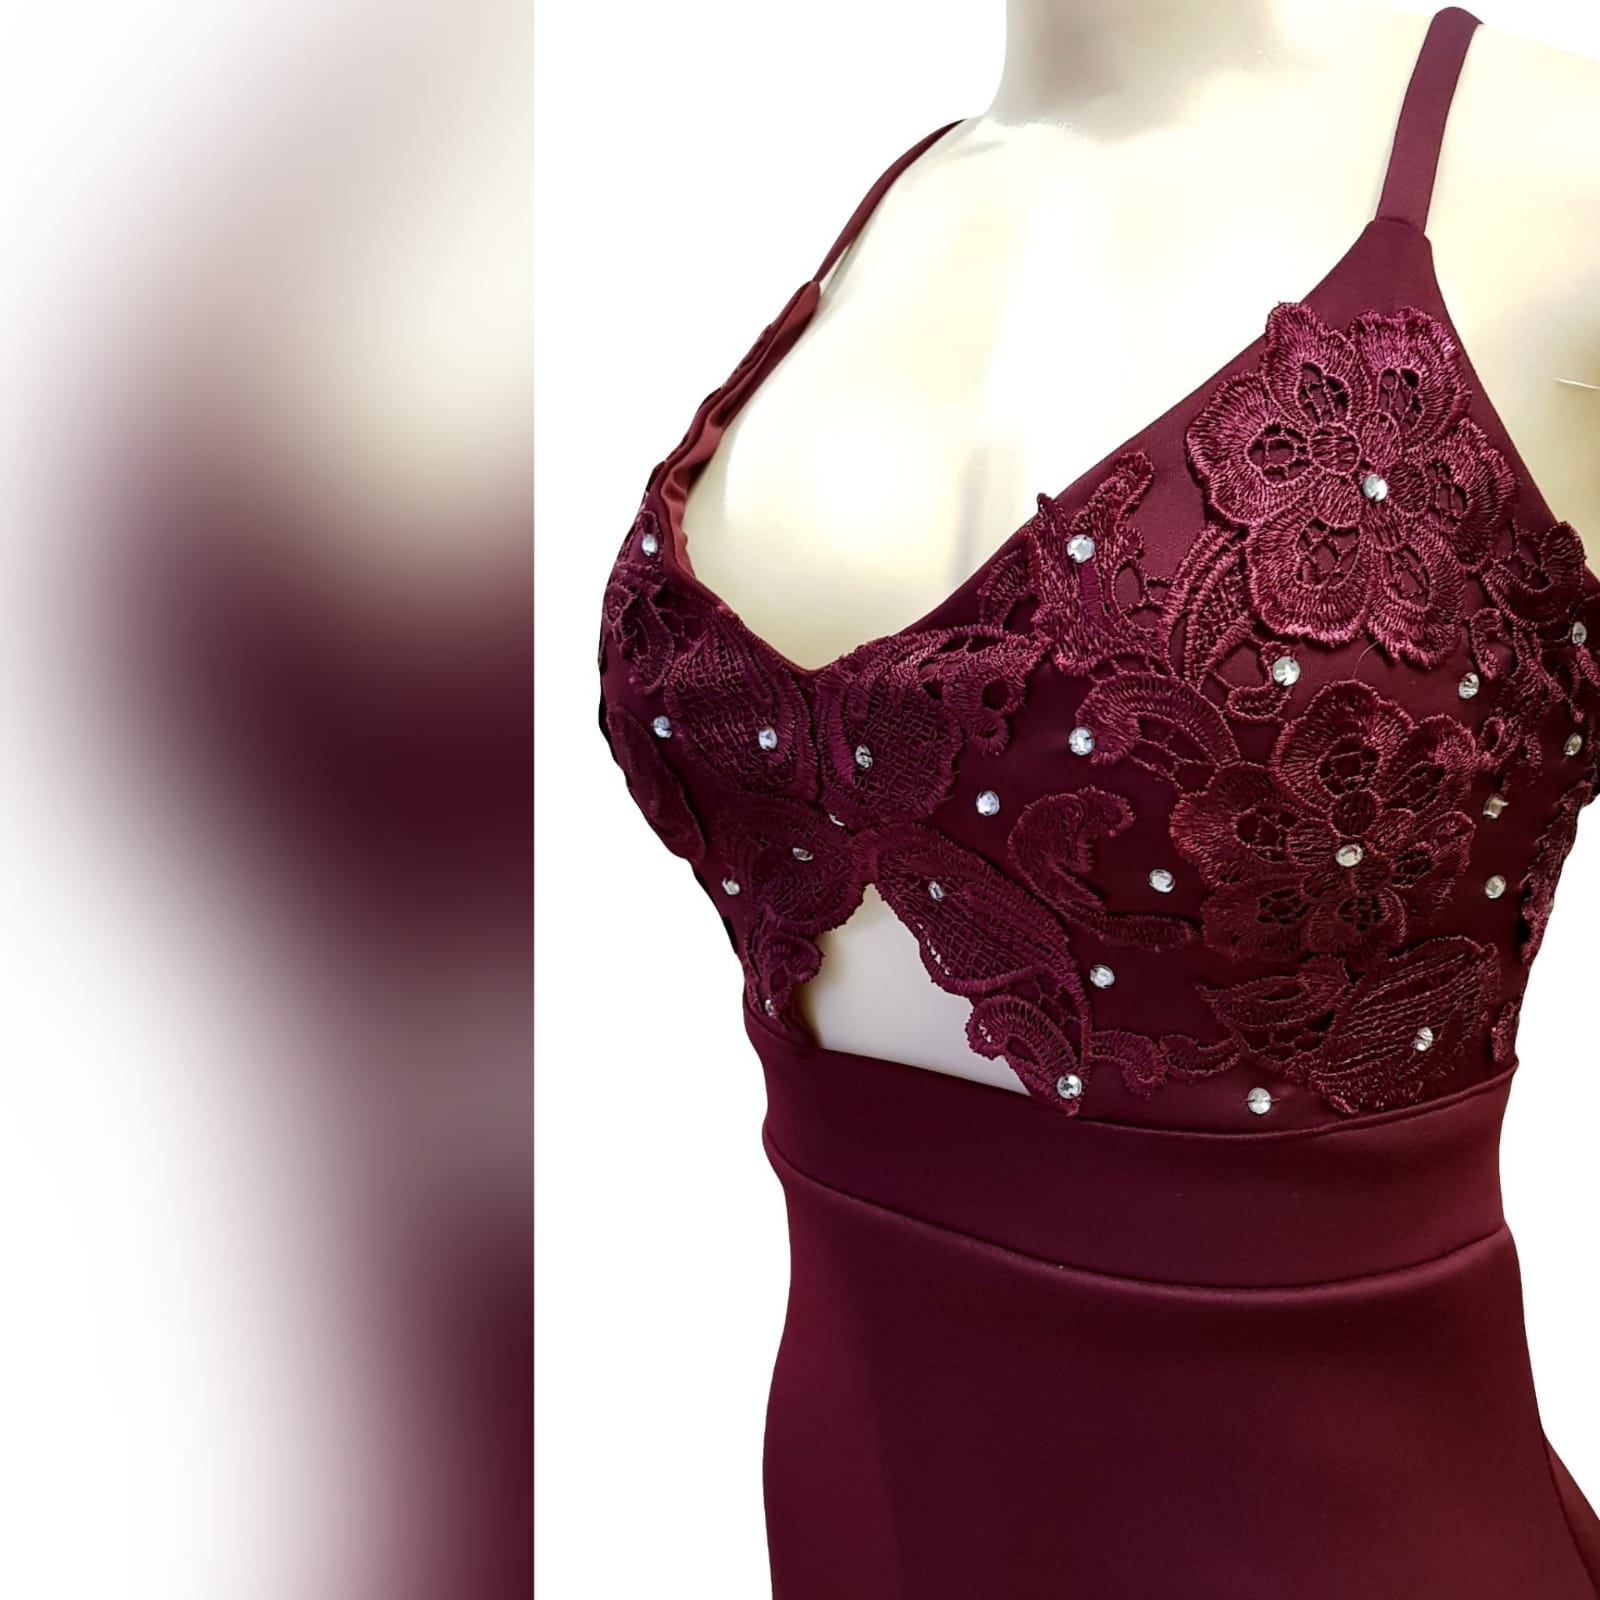 Burgundy soft mermaid plus size prom dress 9 burgundy soft mermaid plus size prom dress. Bodice detailed with lace and silver beads, small triangle opening on the waist with waistband finish. Open laceup back and a train.